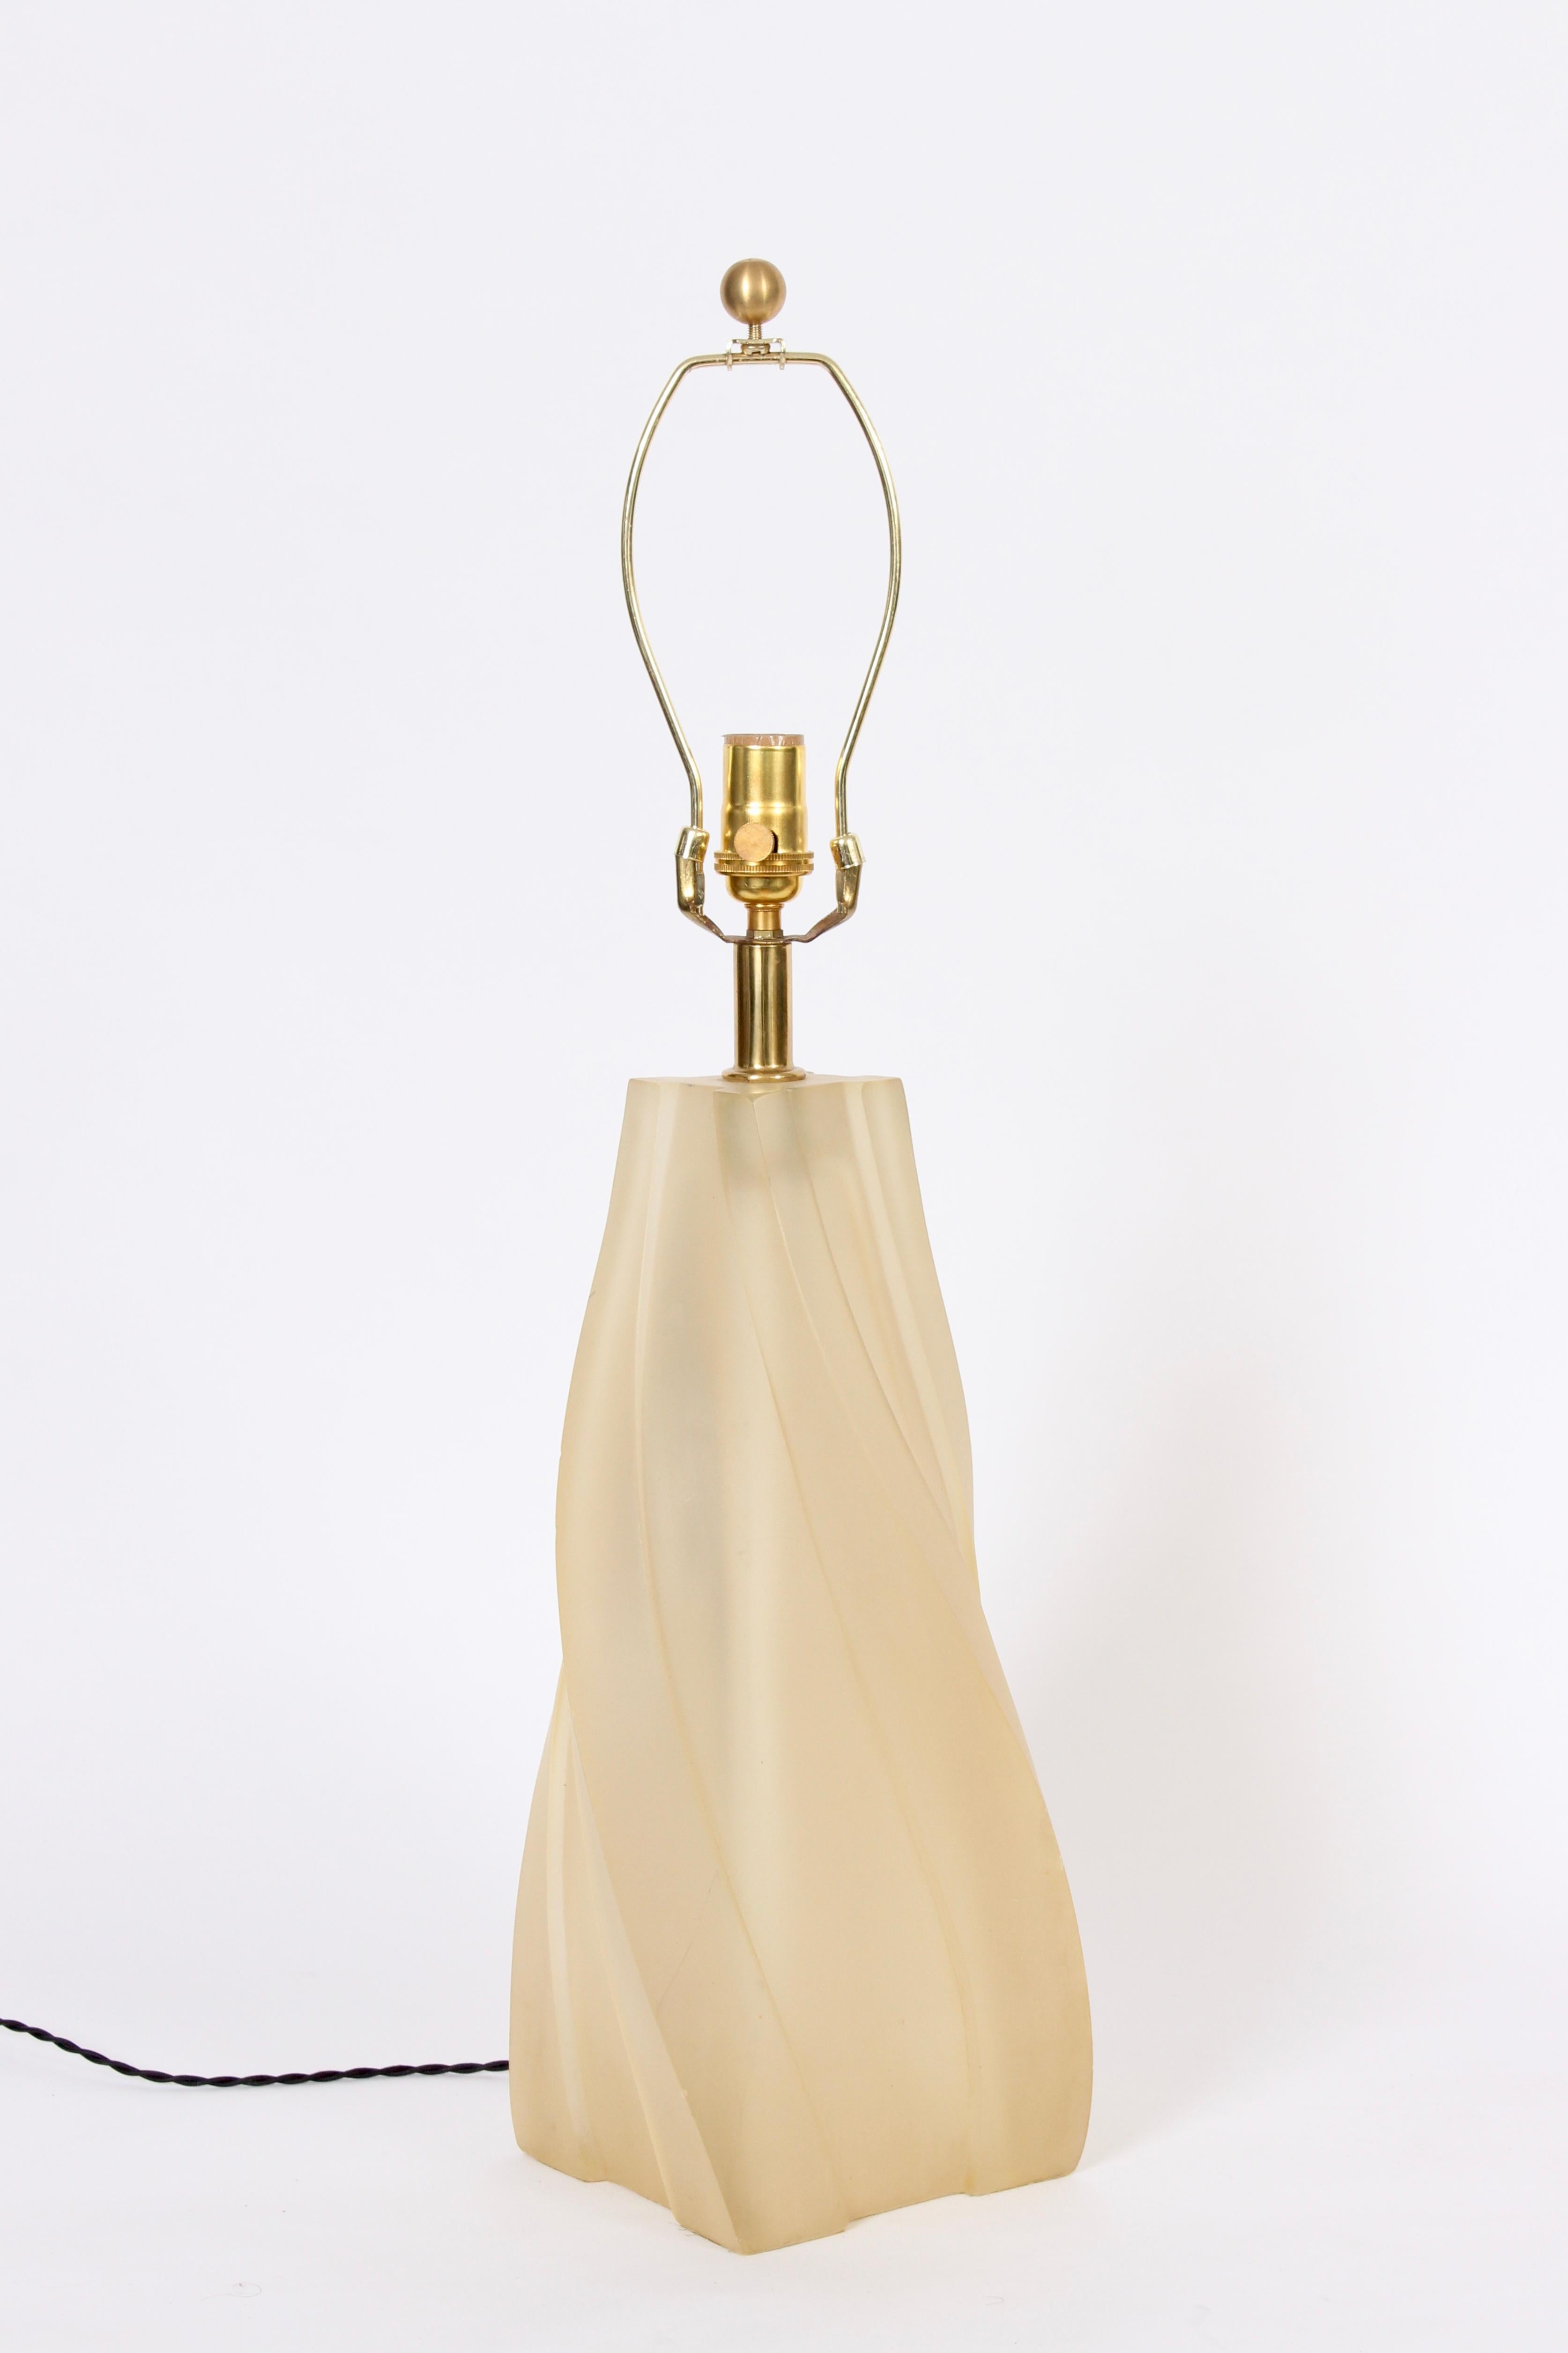 Hollywood Regency Paolo Gucci translucent lucite table lamp, circa 1970.  Featuring a smooth sculpted twist form in warm off-white resin. With subtle glow when illuminated. Shade for display only (10 H x 14 D top x 18 D bottom). 22 H to top of